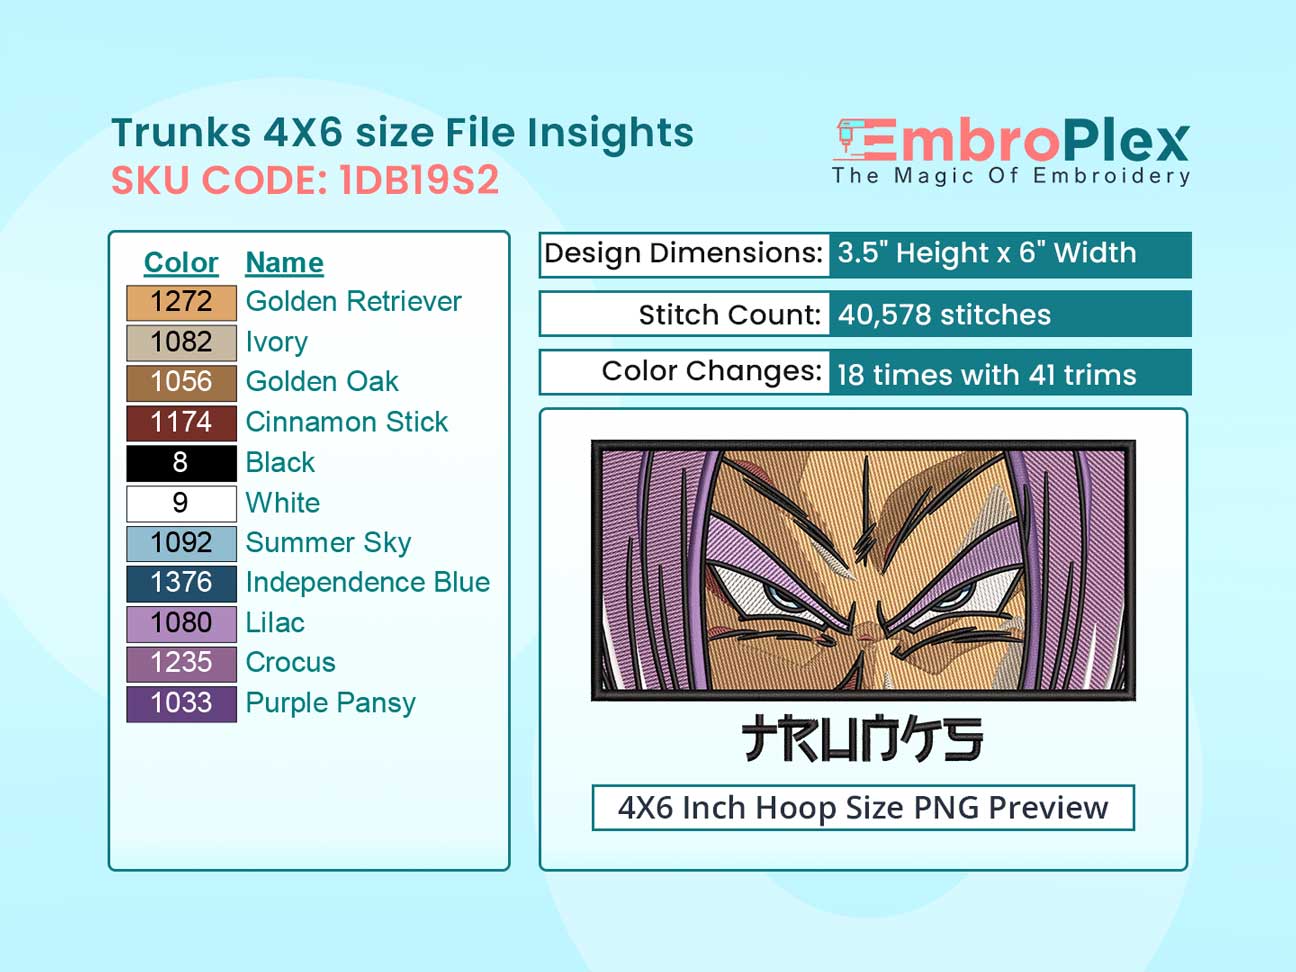 Anime-Inspired Trunks Embroidery Design File - 4x6 Inch hoop Size Variation overview image